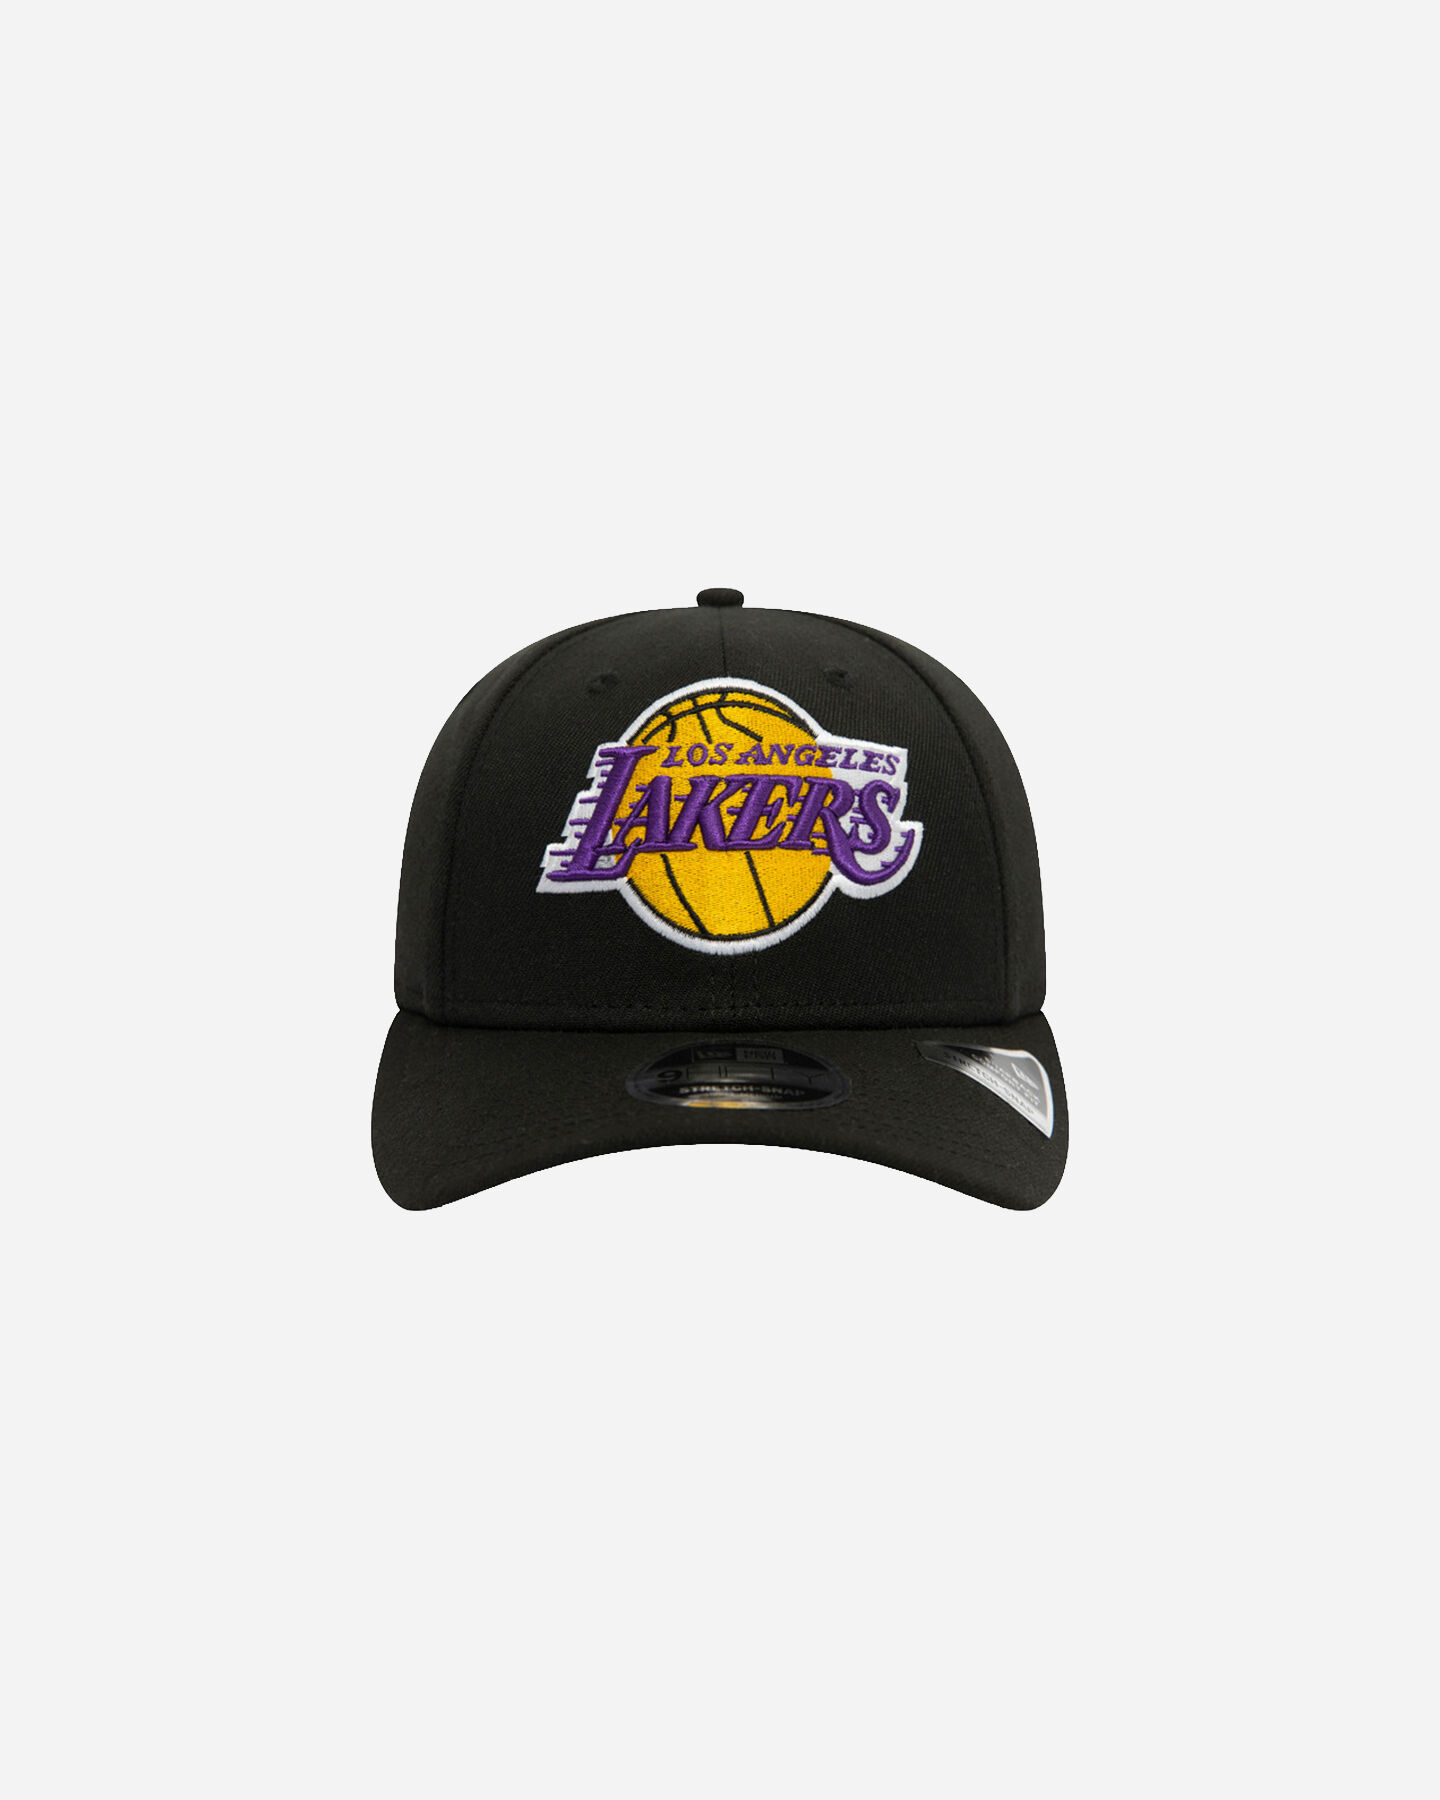  Cappellino NEW ERA 9FIFTY LOS ANGELES LAKERS  S5100642|001|SM scatto 1